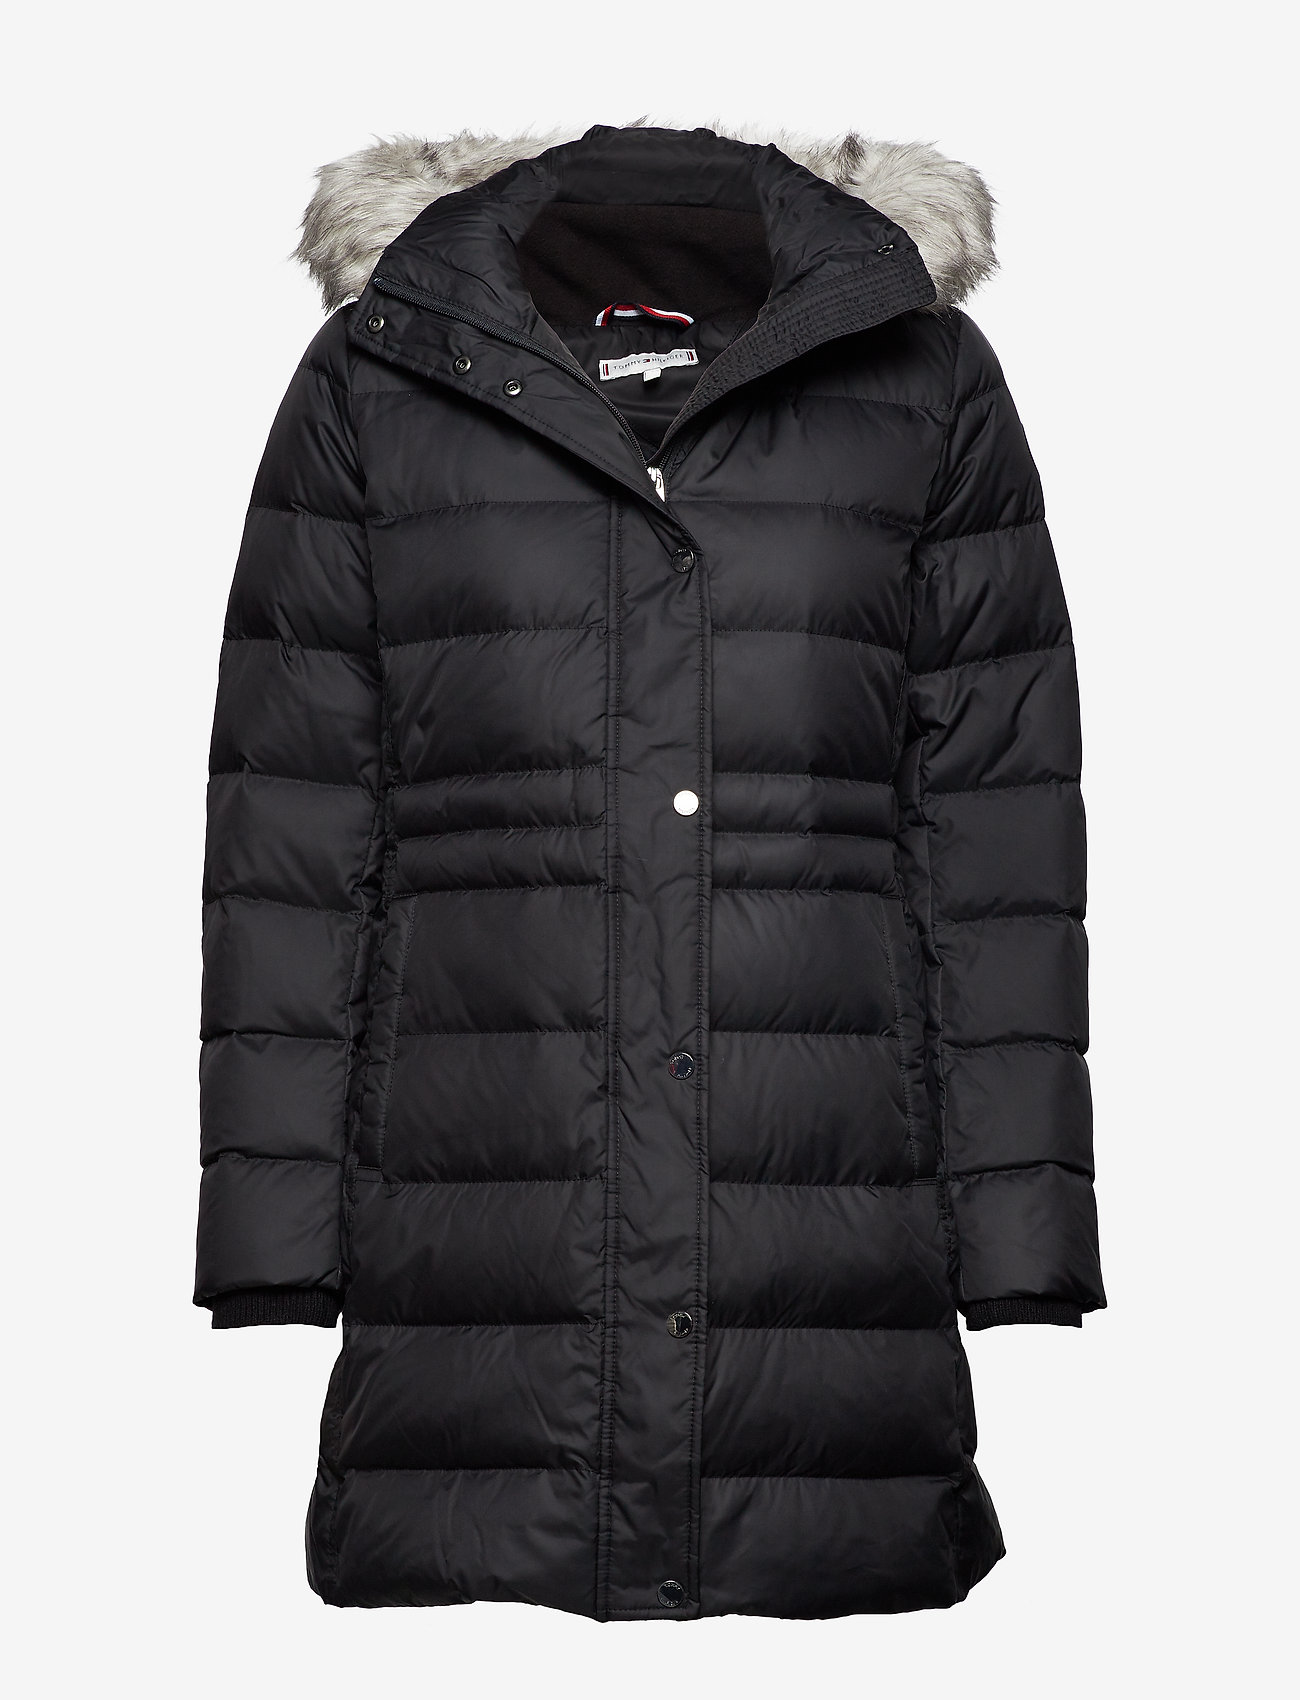 tommy hilfiger tyra down coat Cheaper 